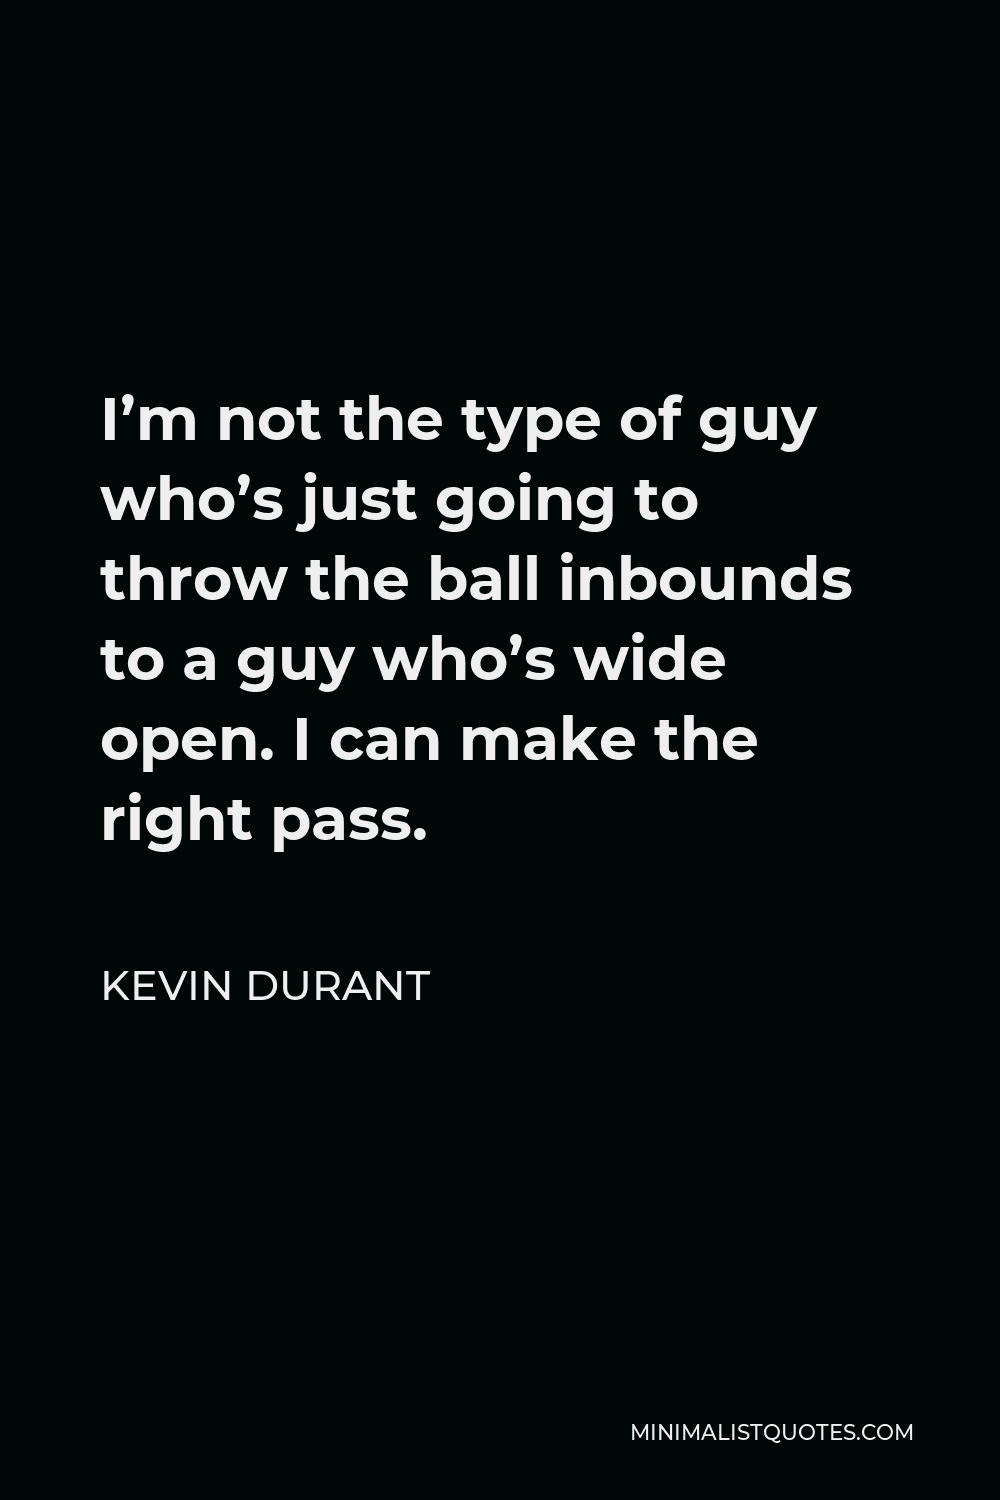 Kevin Durant Quote - I’m not the type of guy who’s just going to throw the ball inbounds to a guy who’s wide open. I can make the right pass.